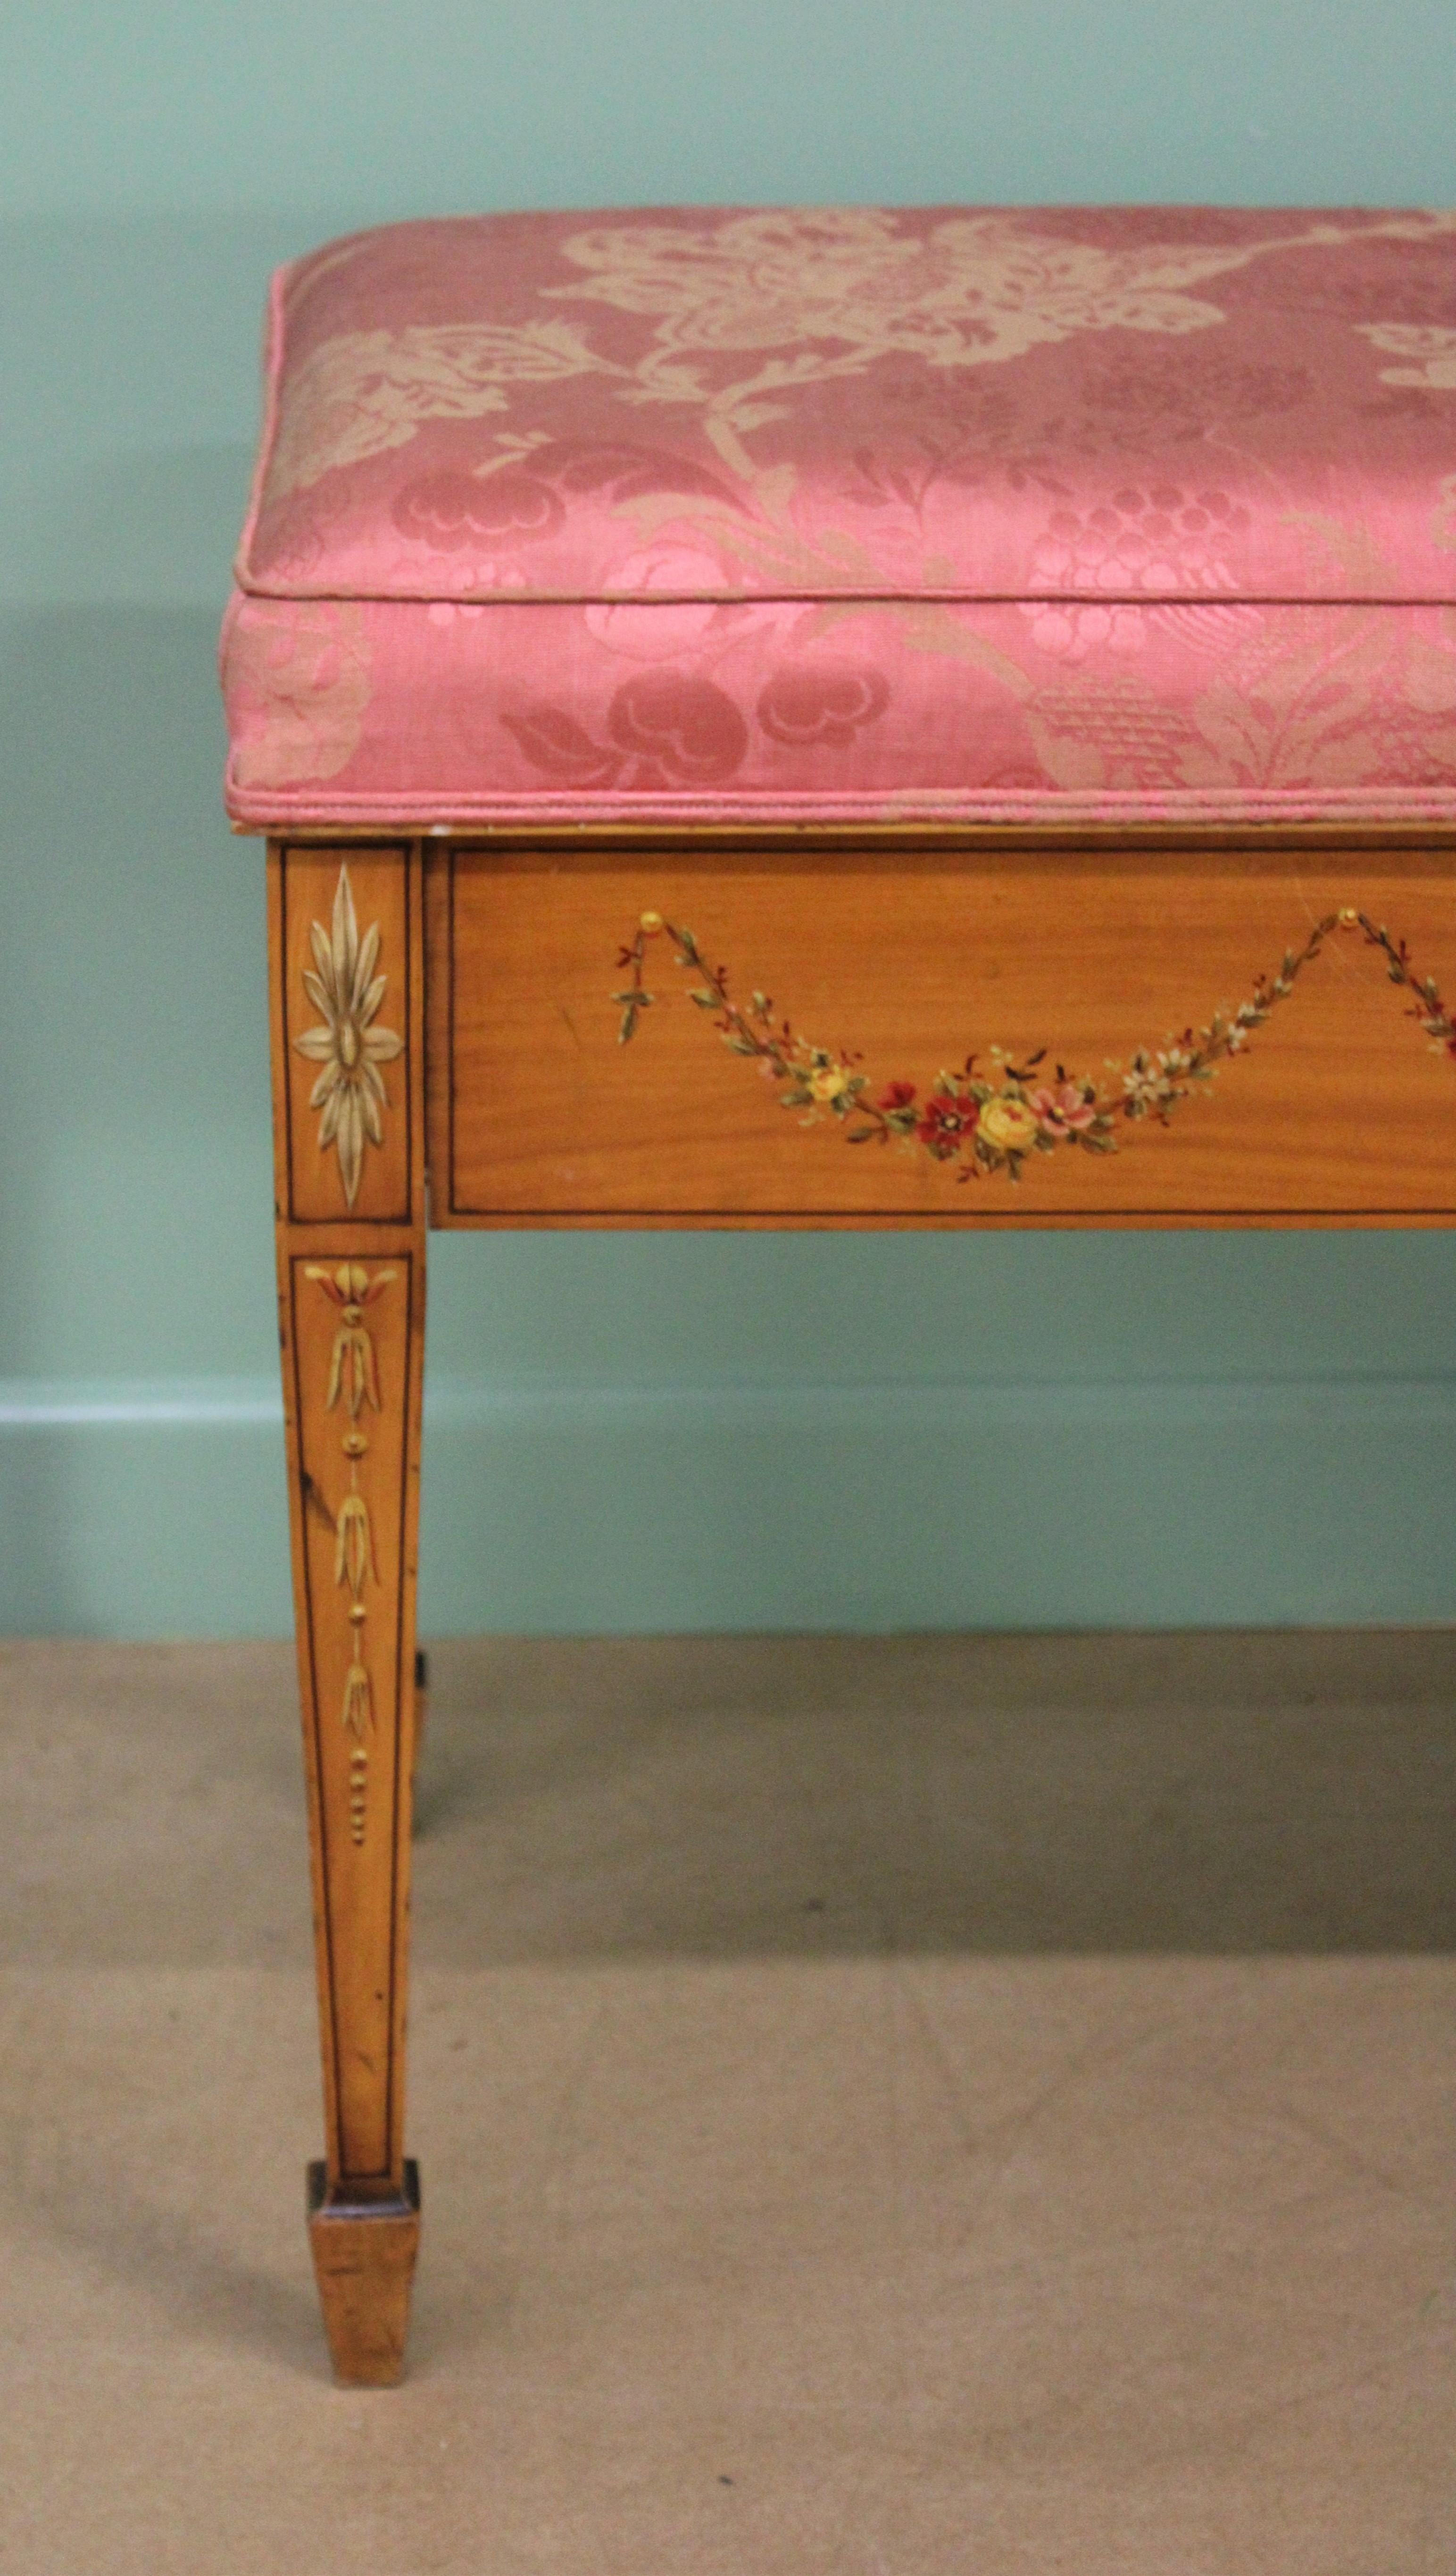 An attractive late Victorian period painted satinwood piano duet stool. Of Fine construction and in very good original condition. Beautifully decorated with hand painted motifs throughout , including harebells and floral garlands. The upholstered